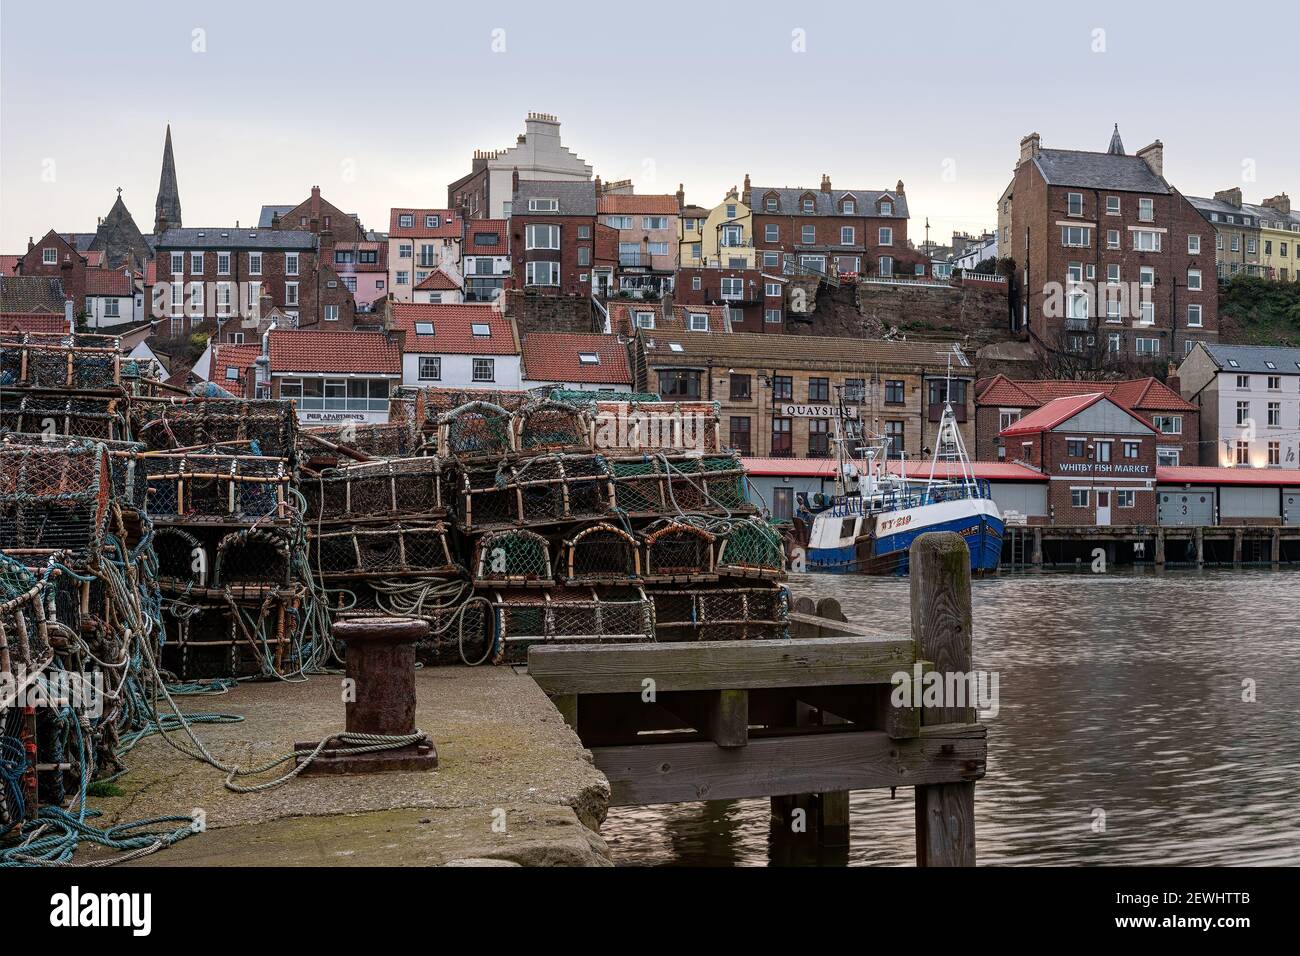 WHITBY, NORTH YORKSHIRE, UK - MARCH 18, 2010:   View across Whitby harbour and waterfront with lobster and crab pots on quay Stock Photo